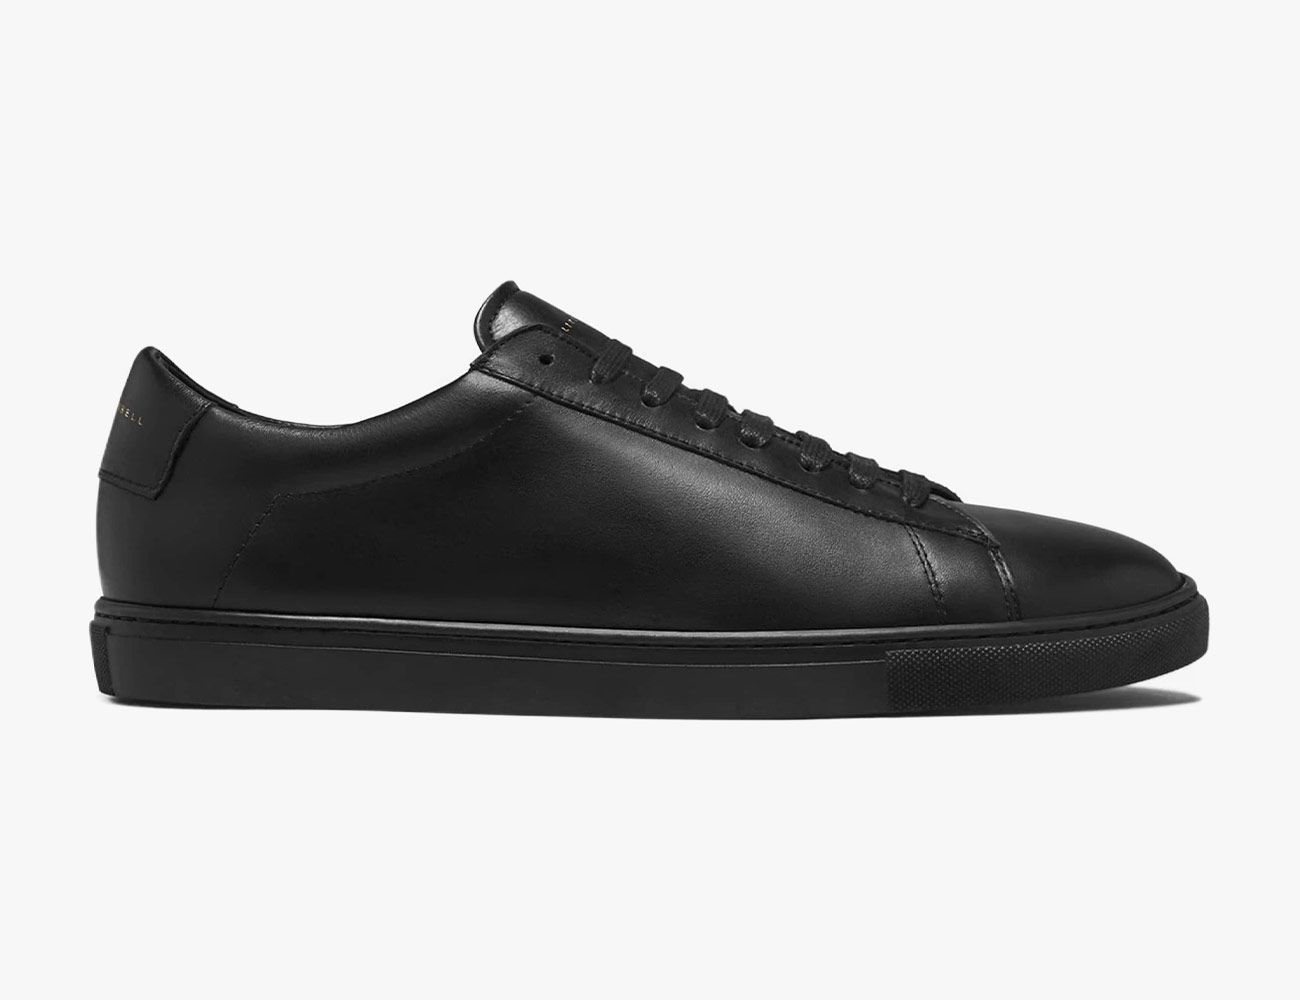 The Best Black Sneakers You Can Buy Right Now